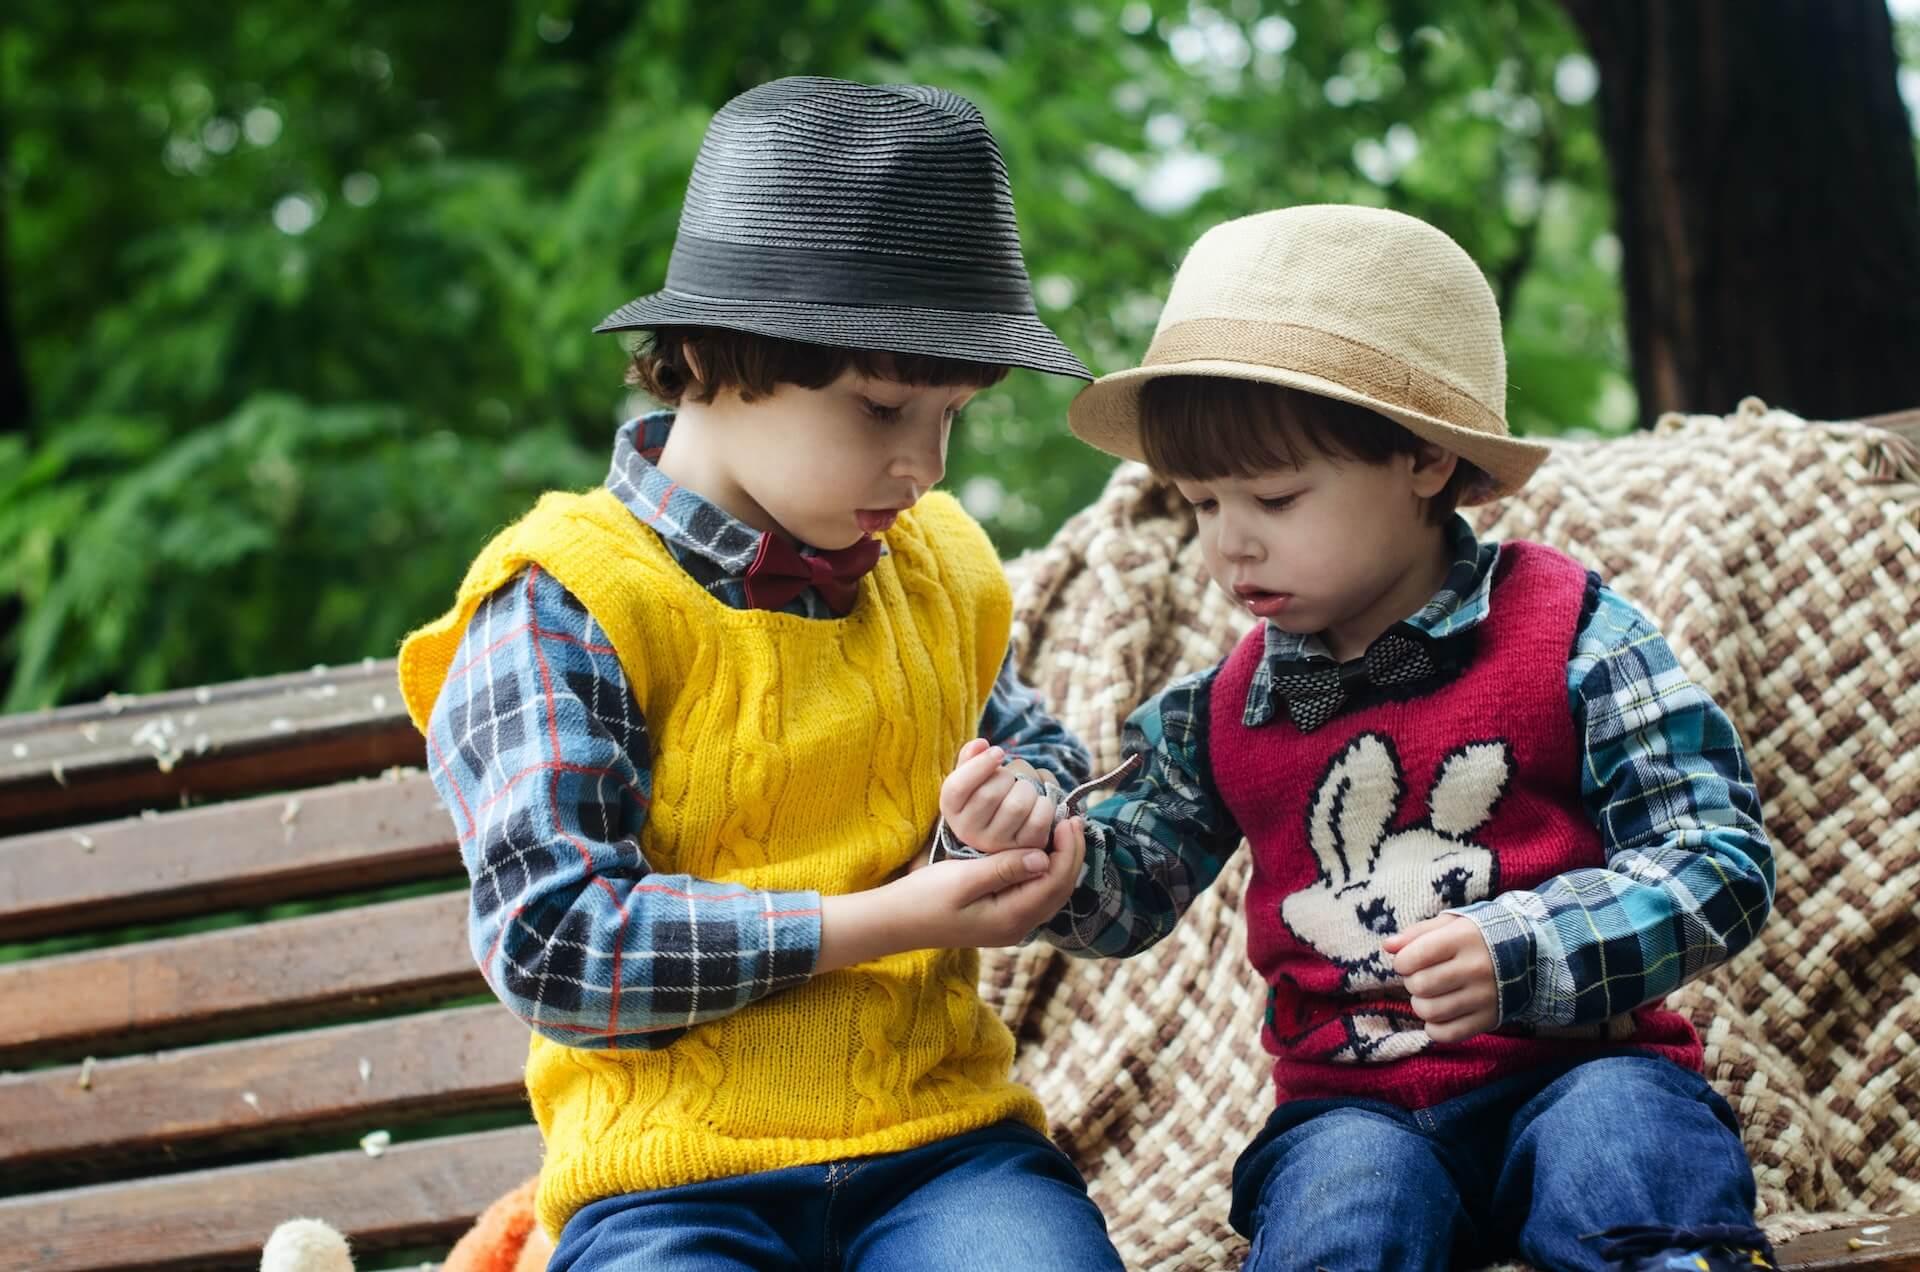 Two Boys Sitting on Bench Wearing Hats and Long-sleeved Shirts